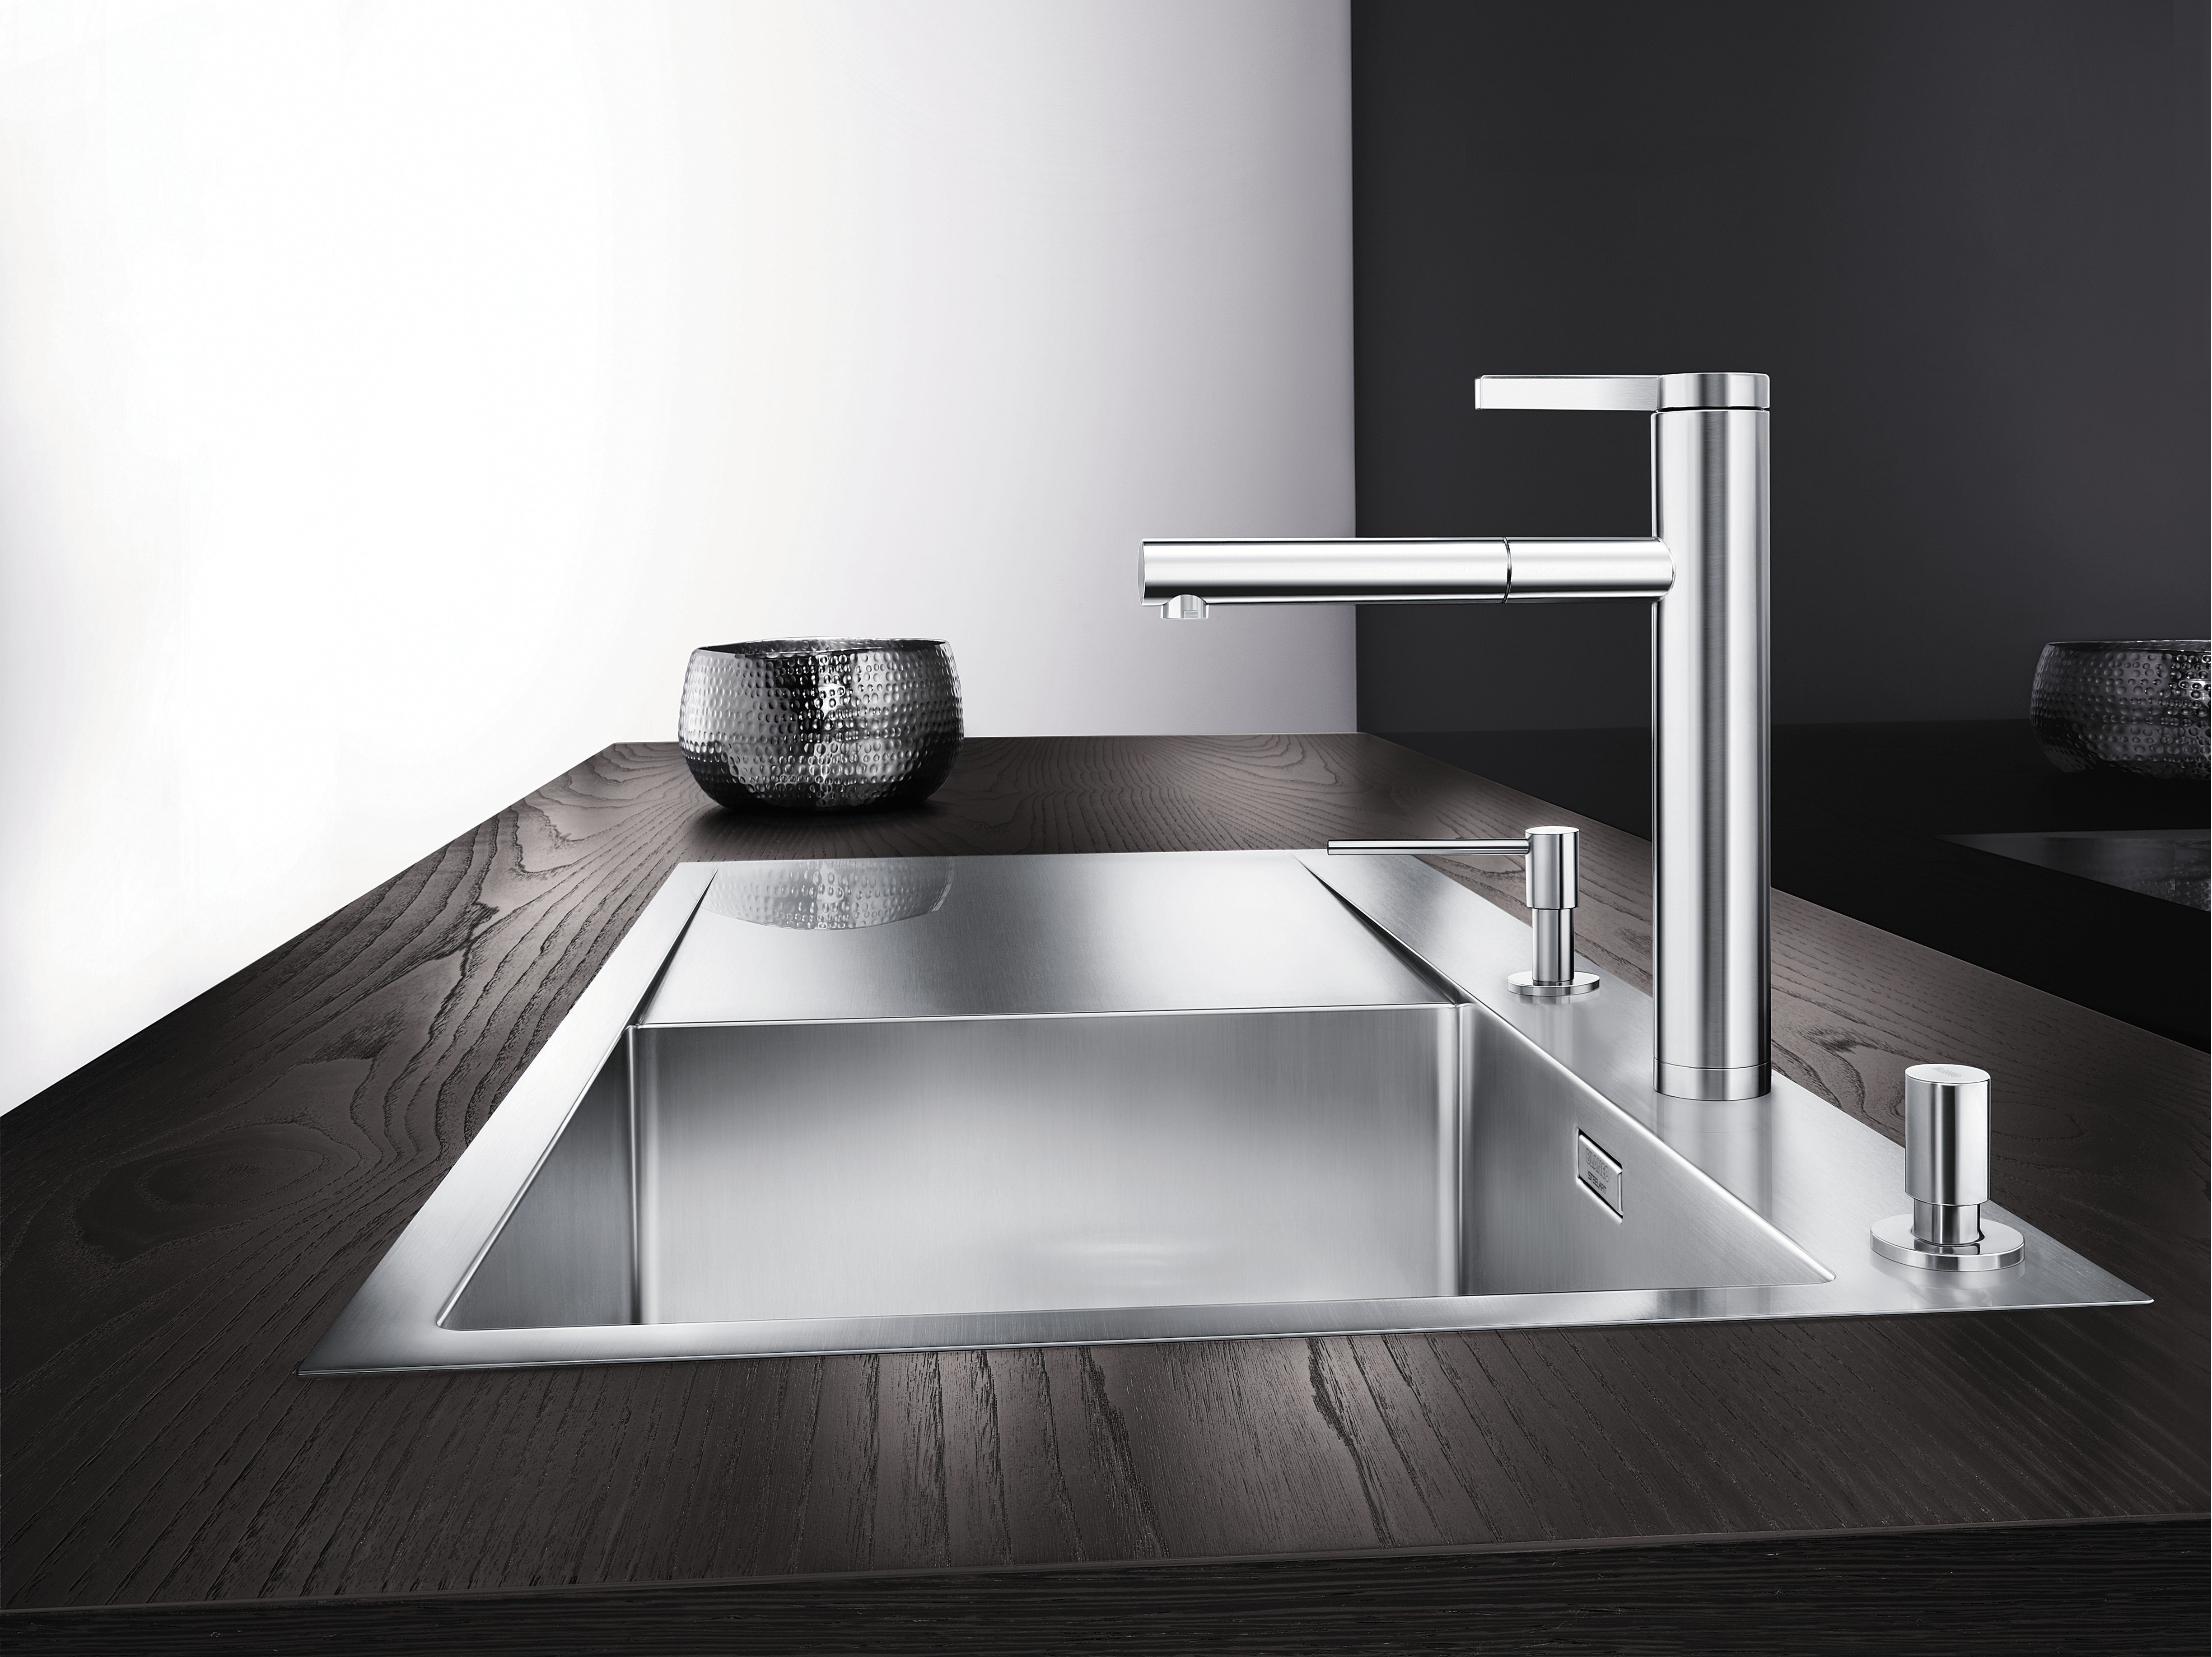 LINEE kitchen mixer taps look clean and elegant on all high-quality sinks